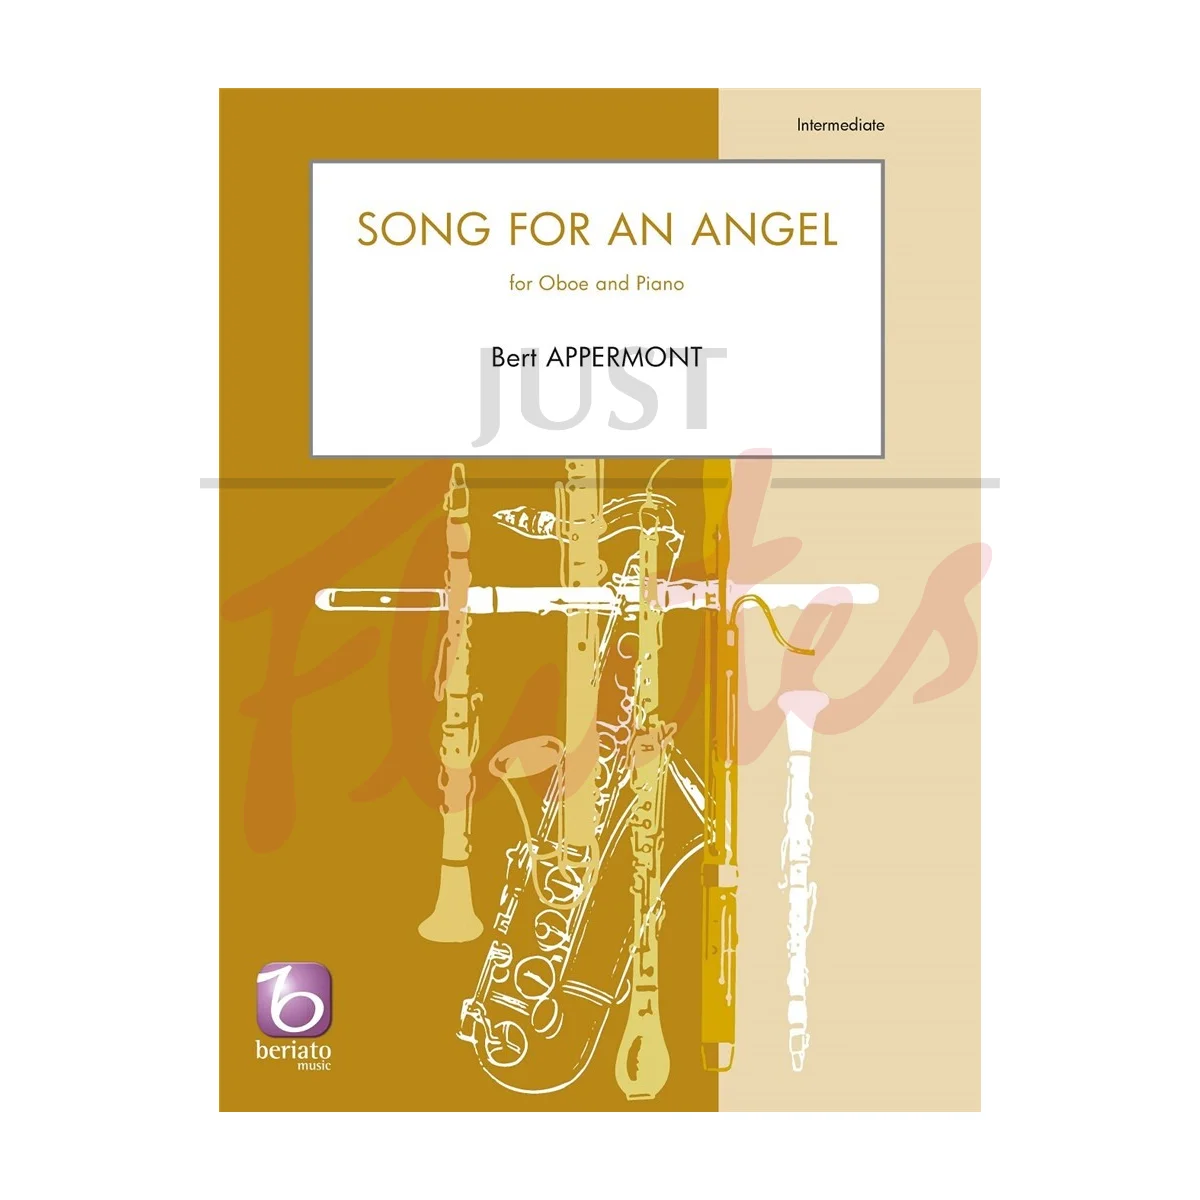 Song for an Angel for Oboe and Piano